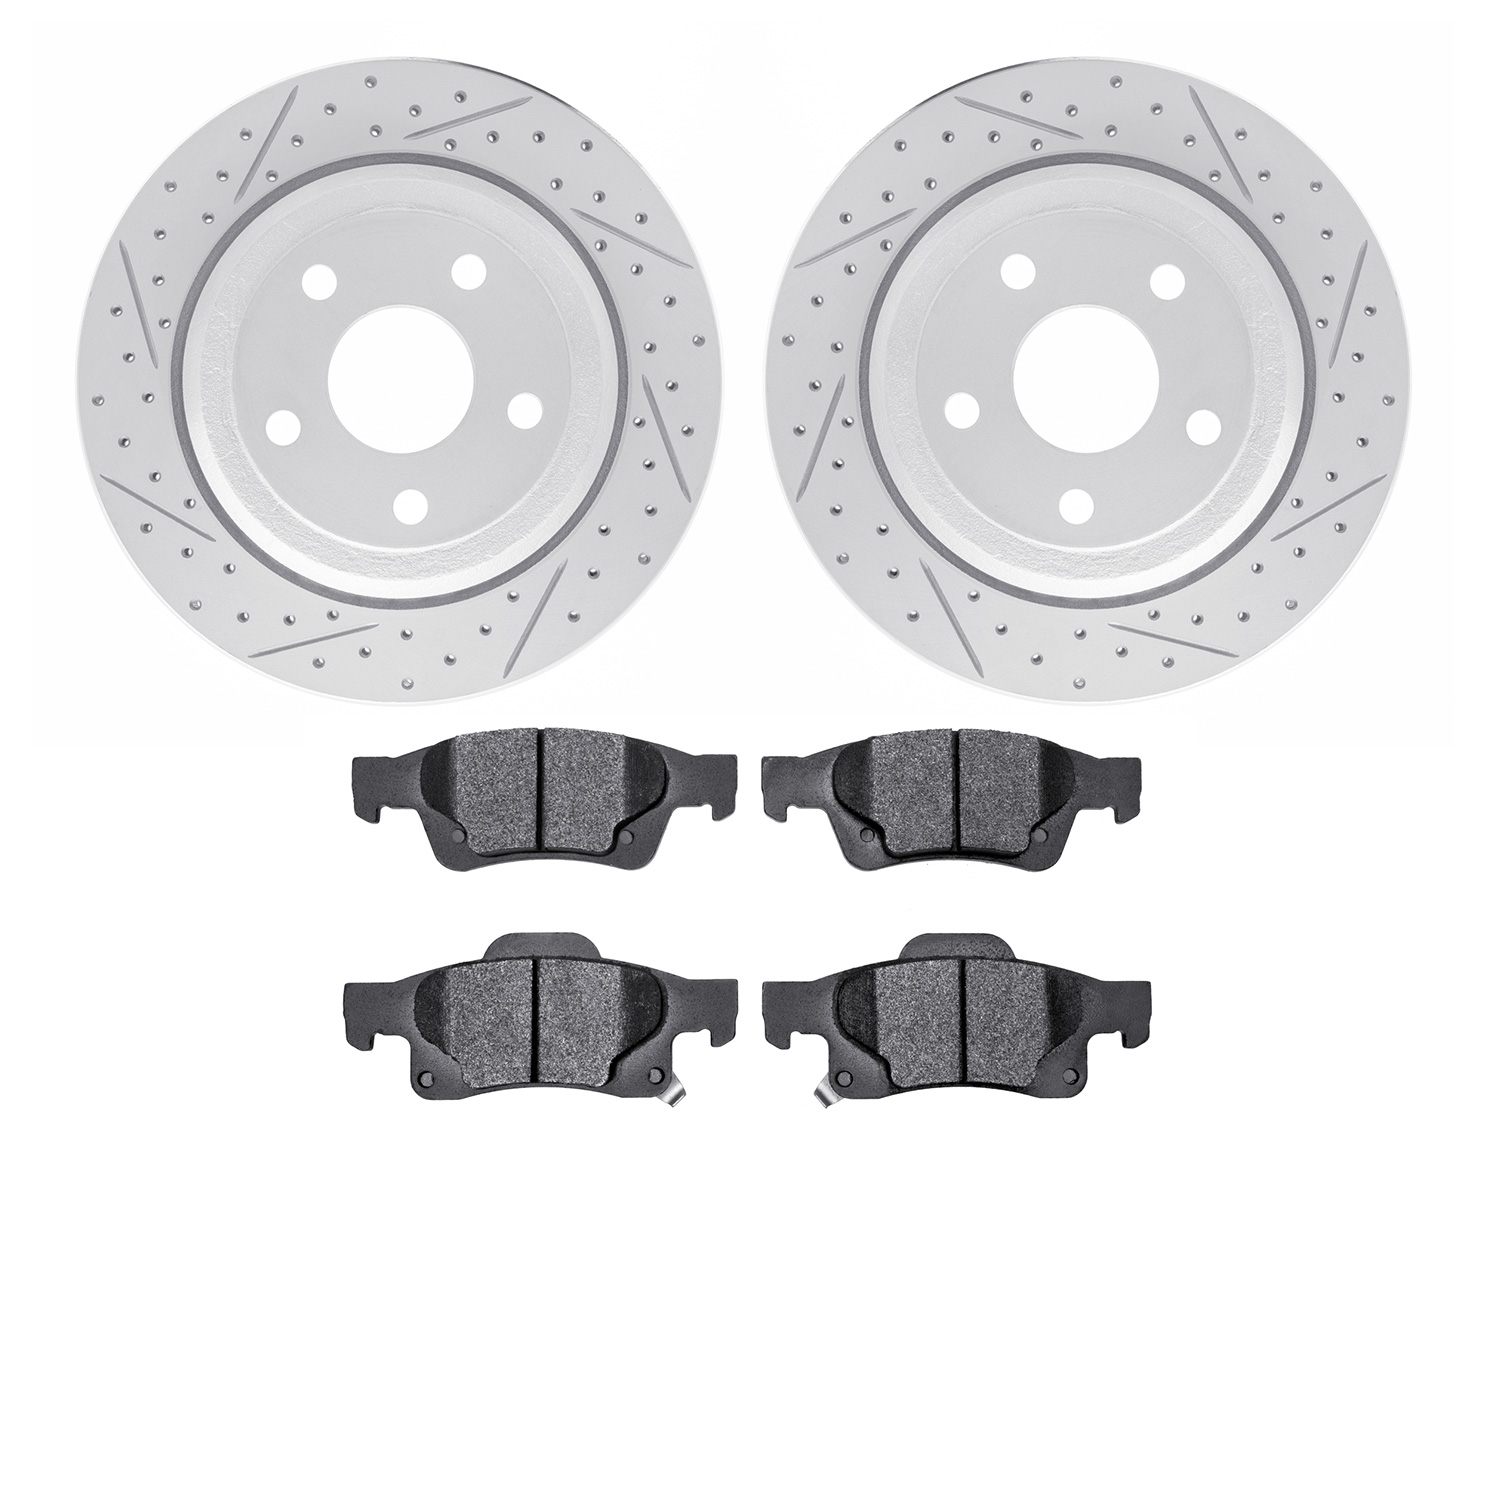 2502-42038 Geoperformance Drilled/Slotted Rotors w/5000 Advanced Brake Pads Kit, Fits Select Mopar, Position: Rear